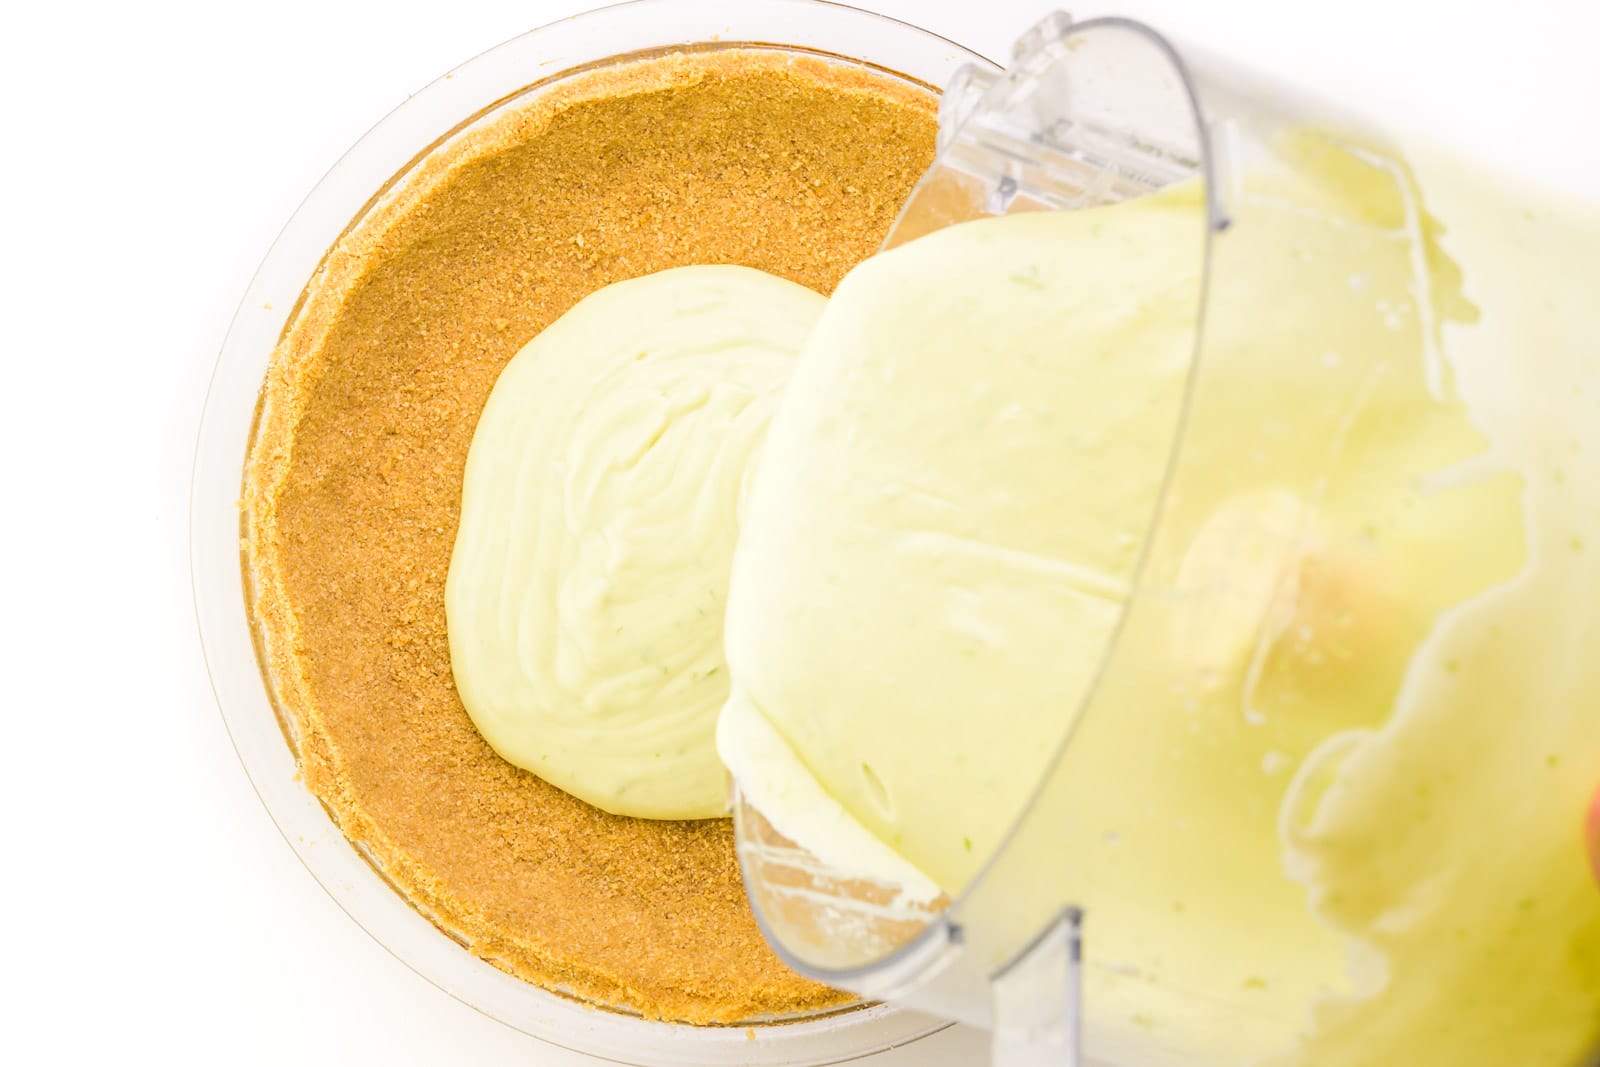 Key lime filling is being poured into a graham cracker crust.